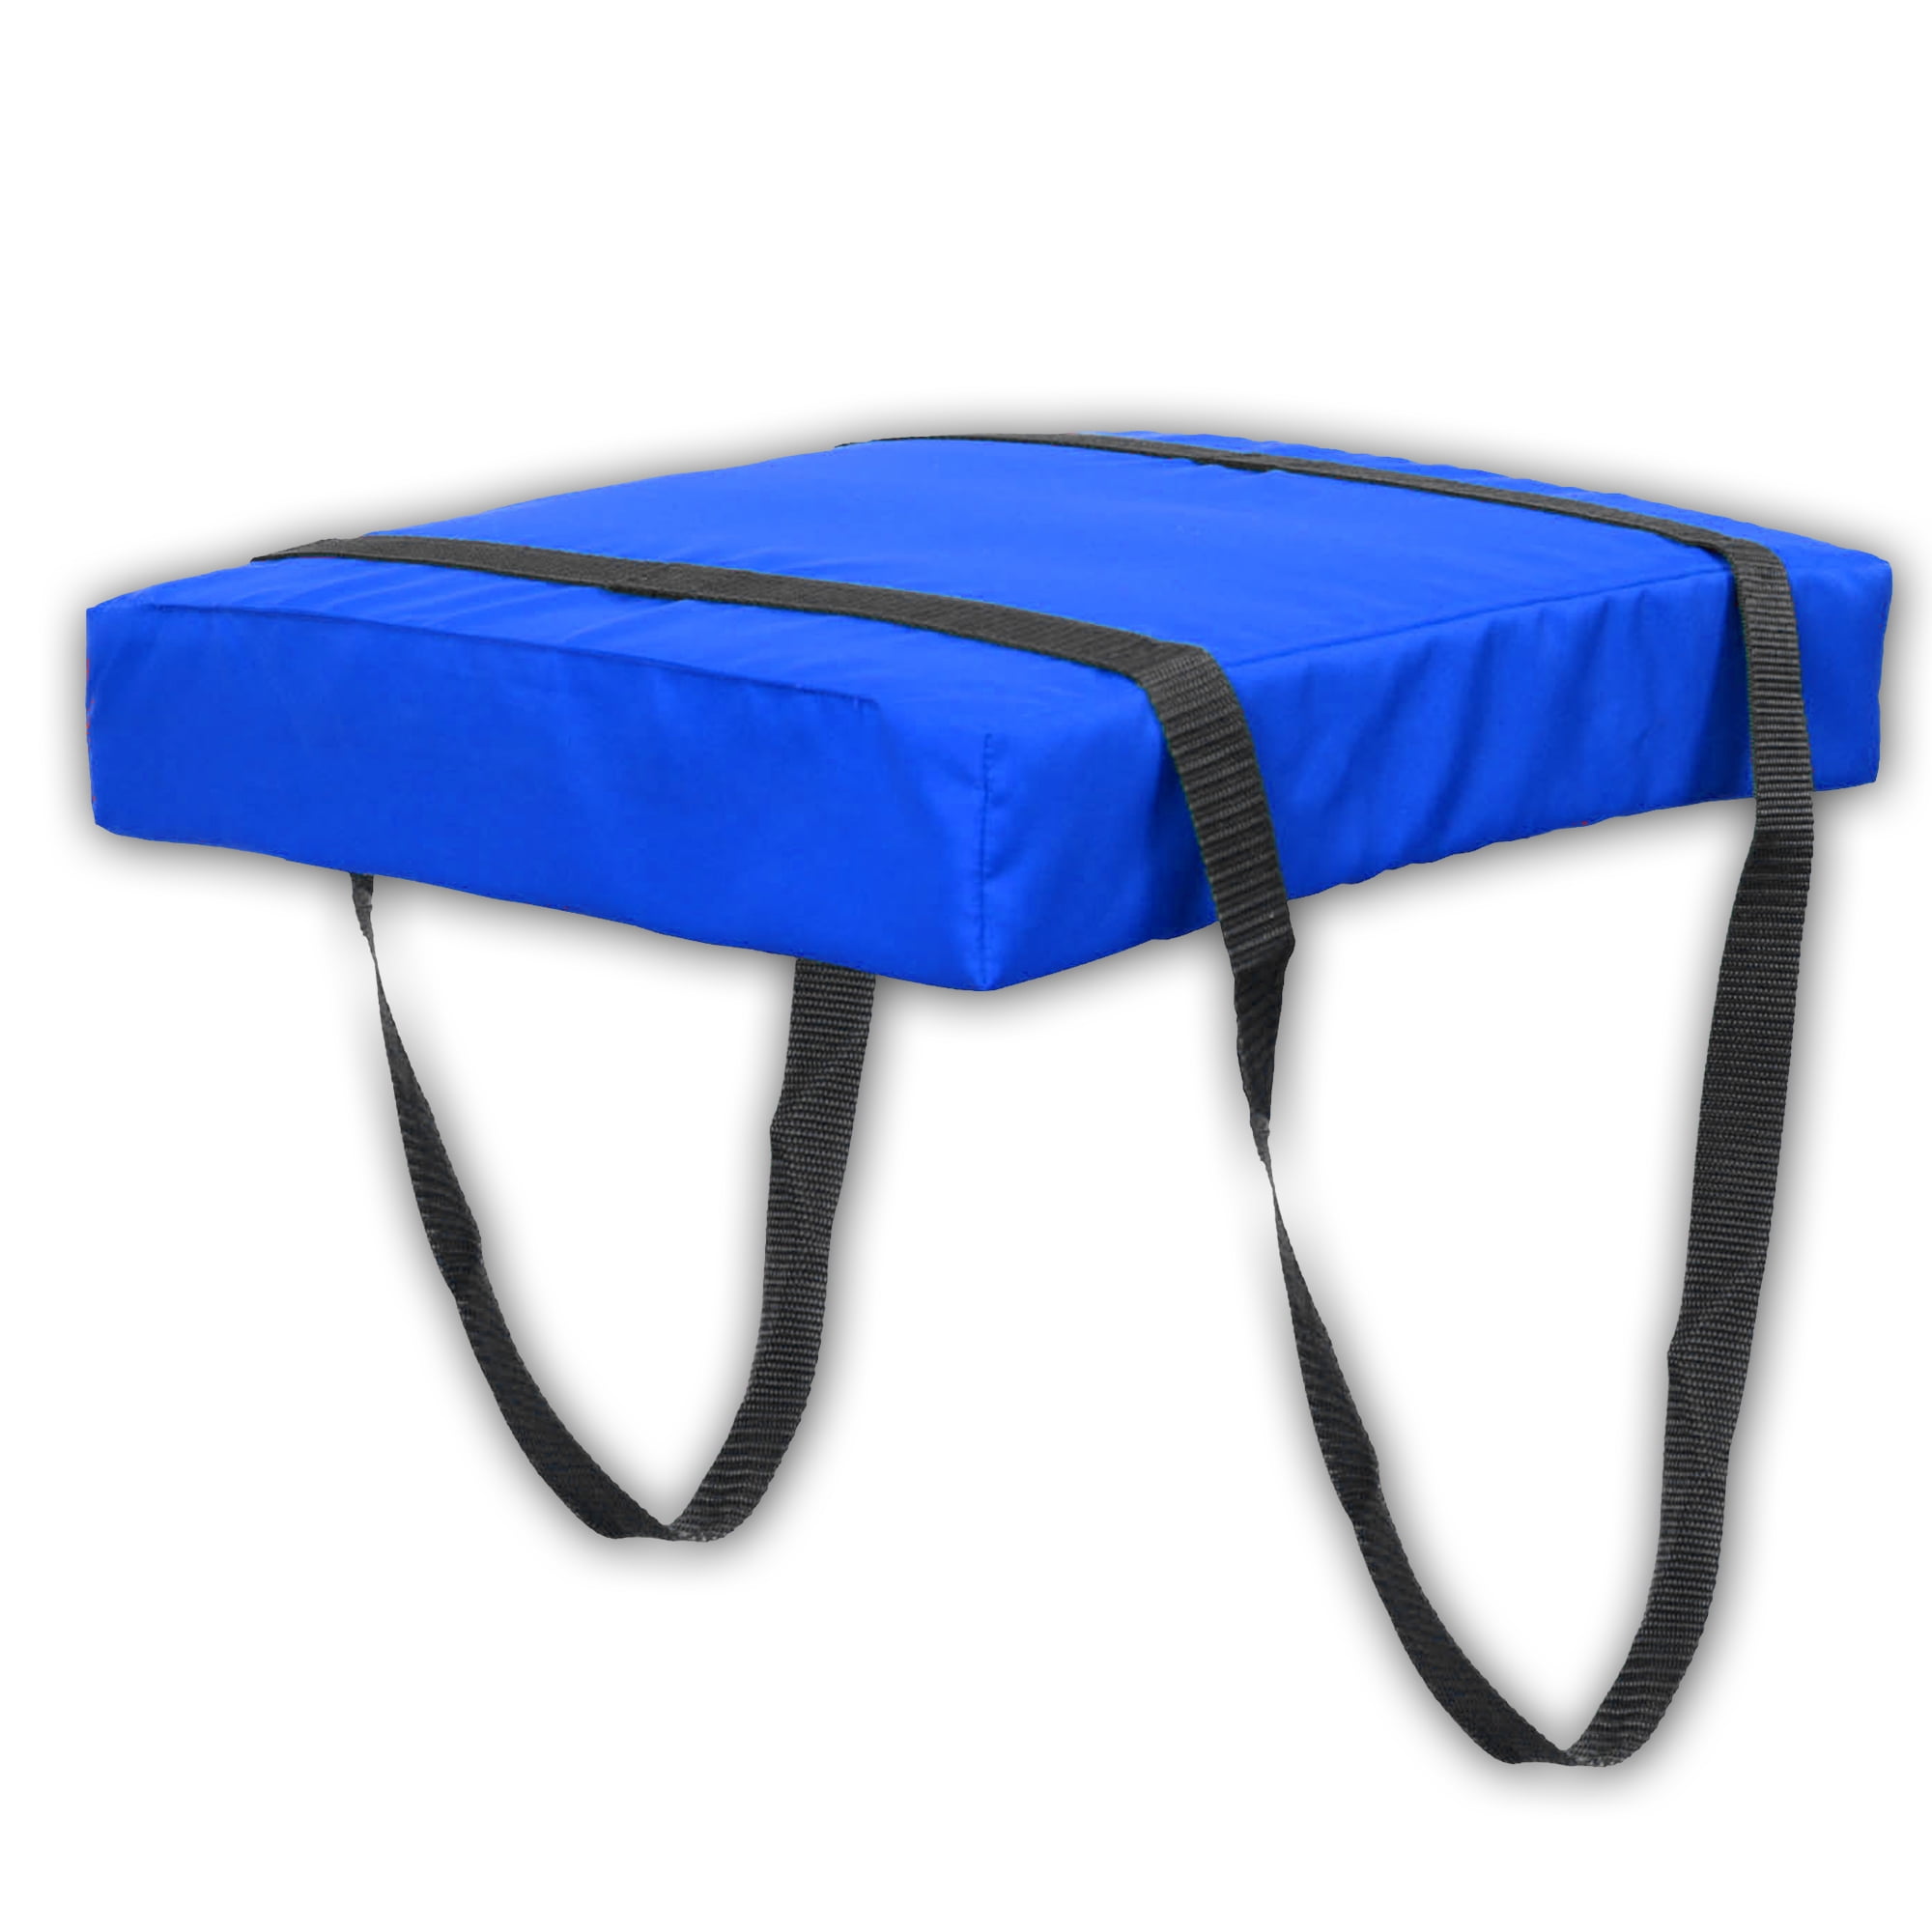 AliHip Cushion – Metal & Mobility Products, Inc.